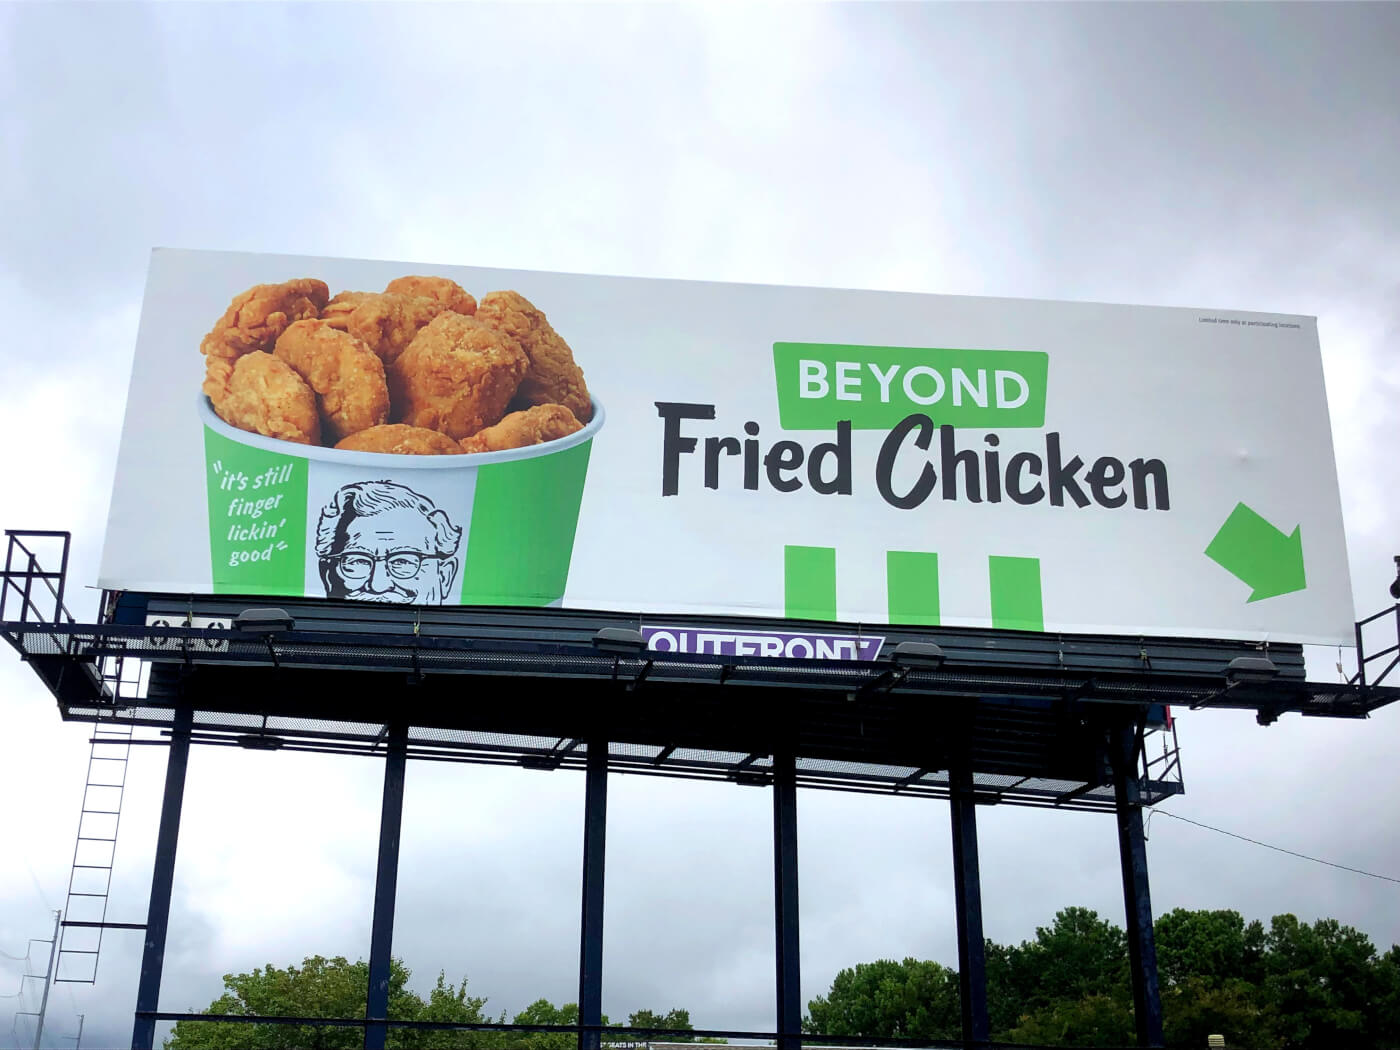 KFC Launches its Beyond Fried Chicken